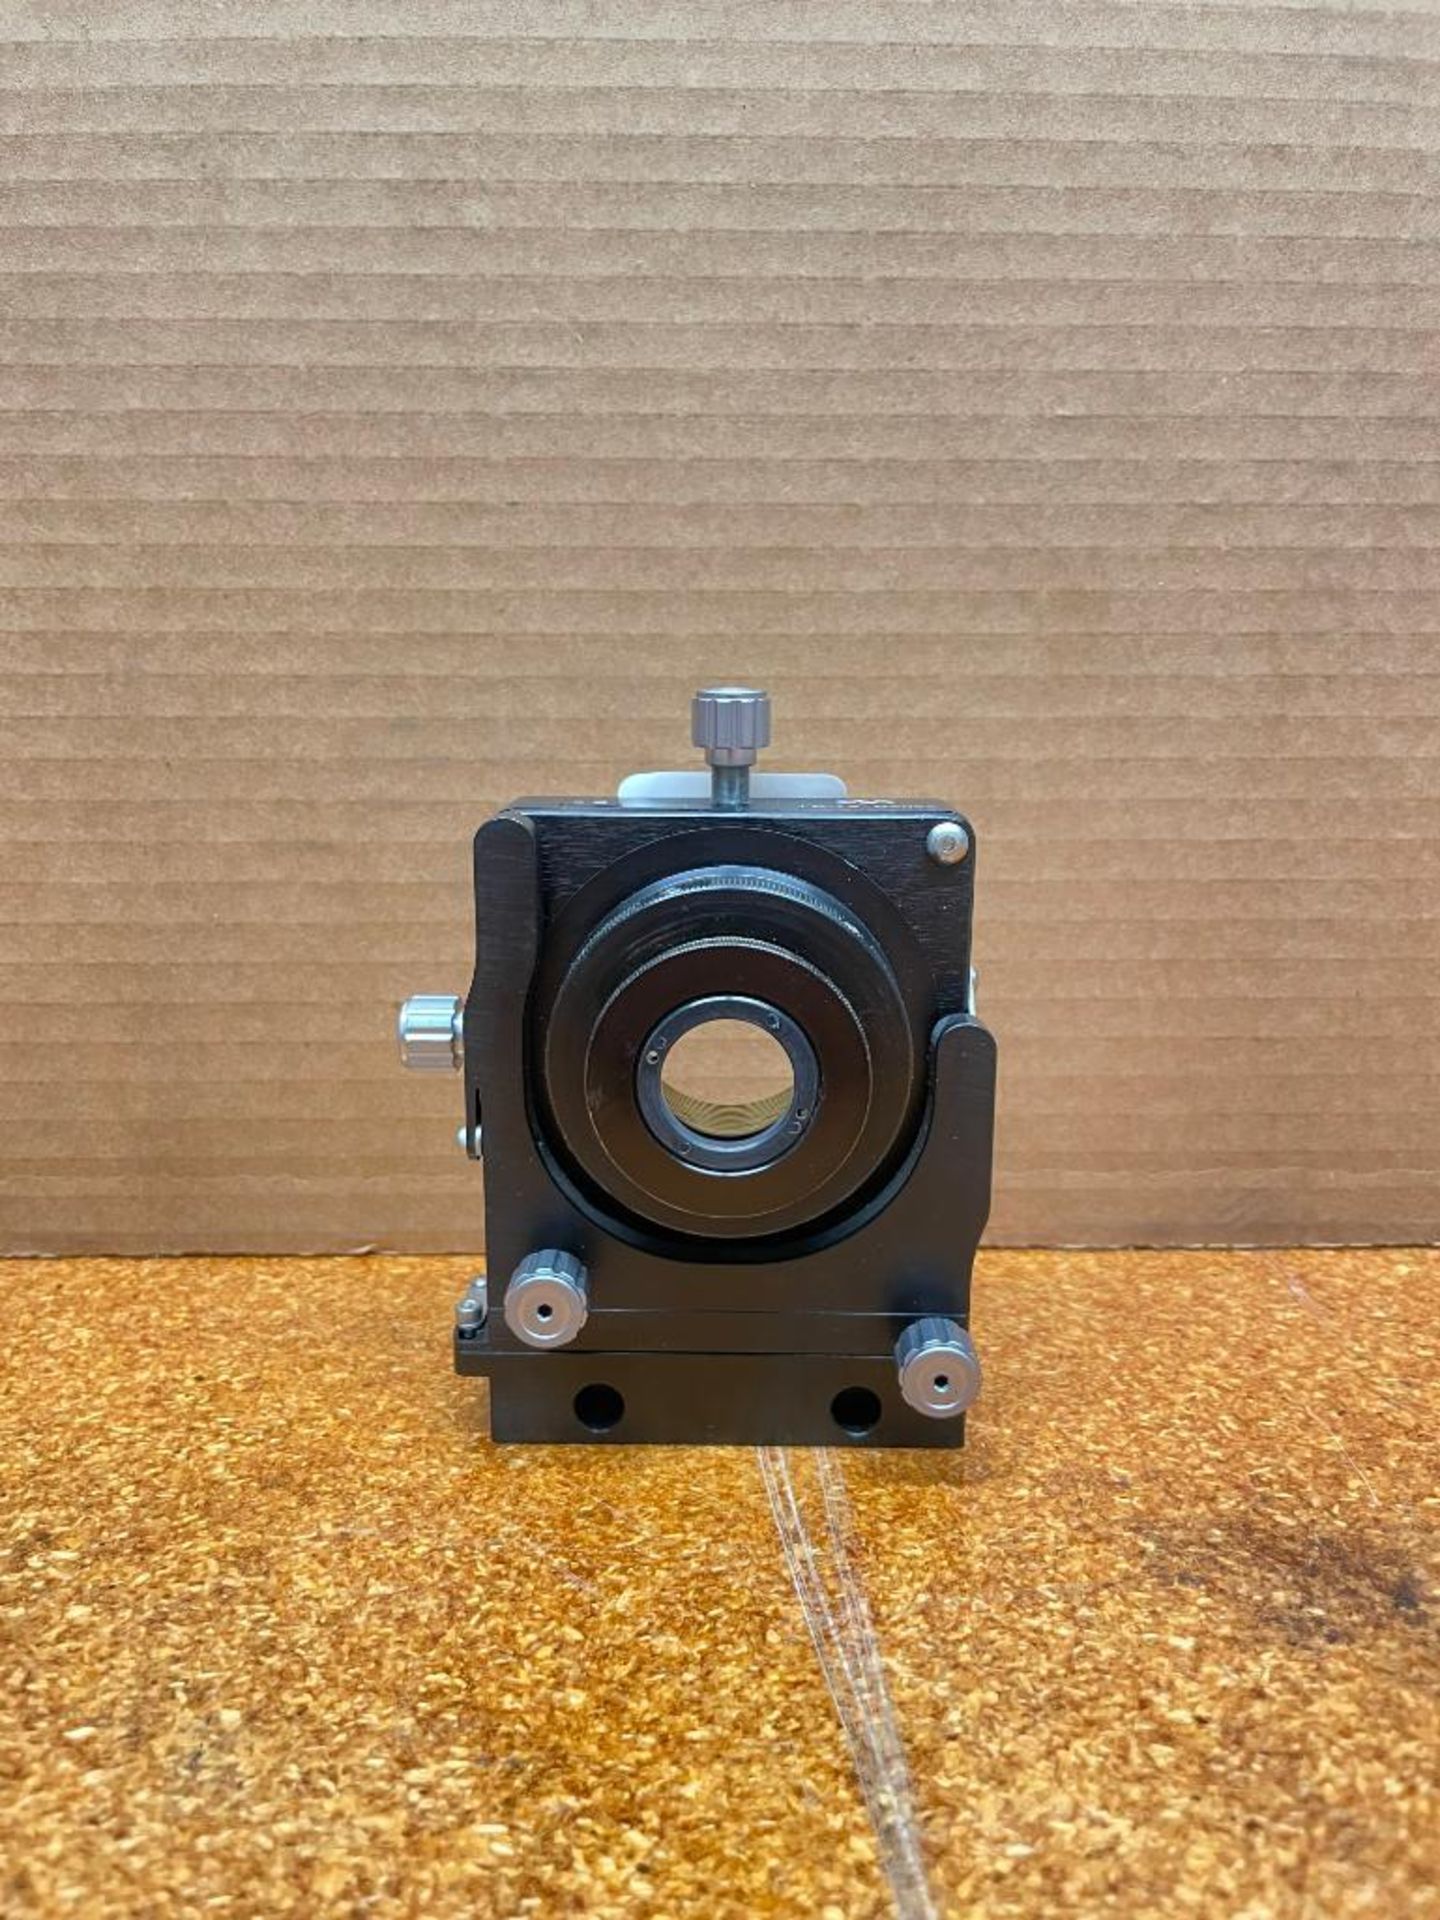 5-AXIS OPTIC POSITIONER BRAND/MODEL: NEWPORT LP-1A RETAIL$: $860 ORIGINAL RETAIL QTY: 1 - Image 2 of 4